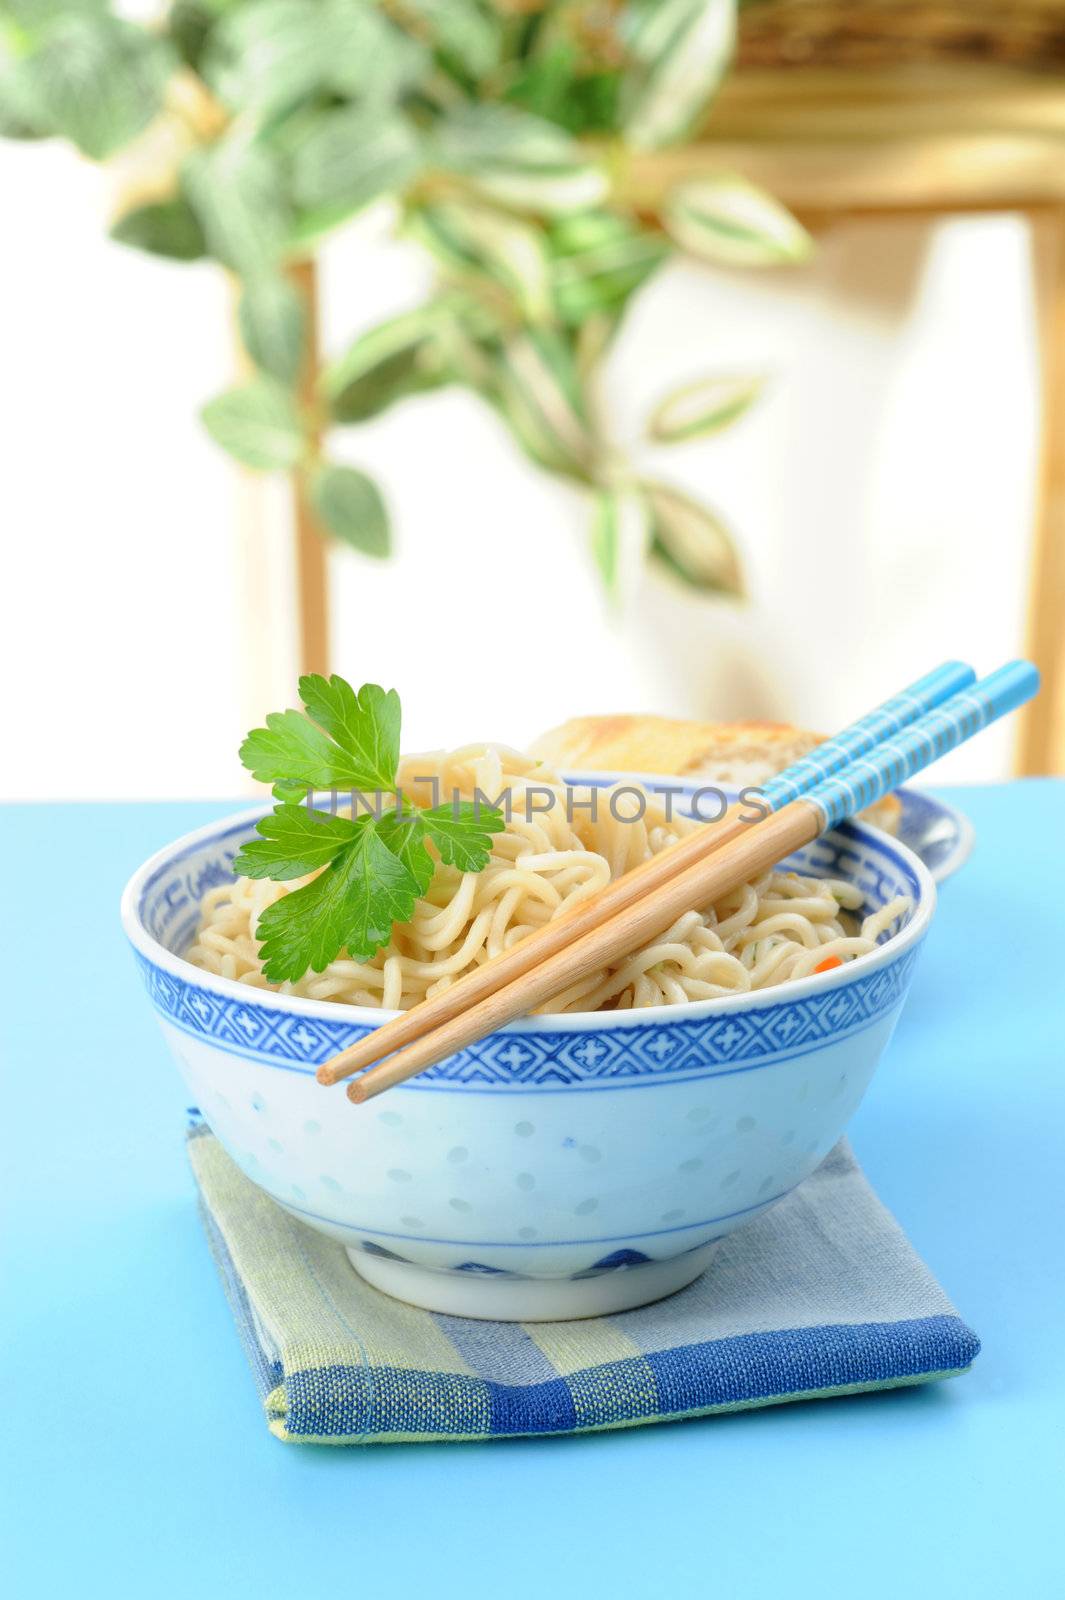 Chinese Noodles by billberryphotography